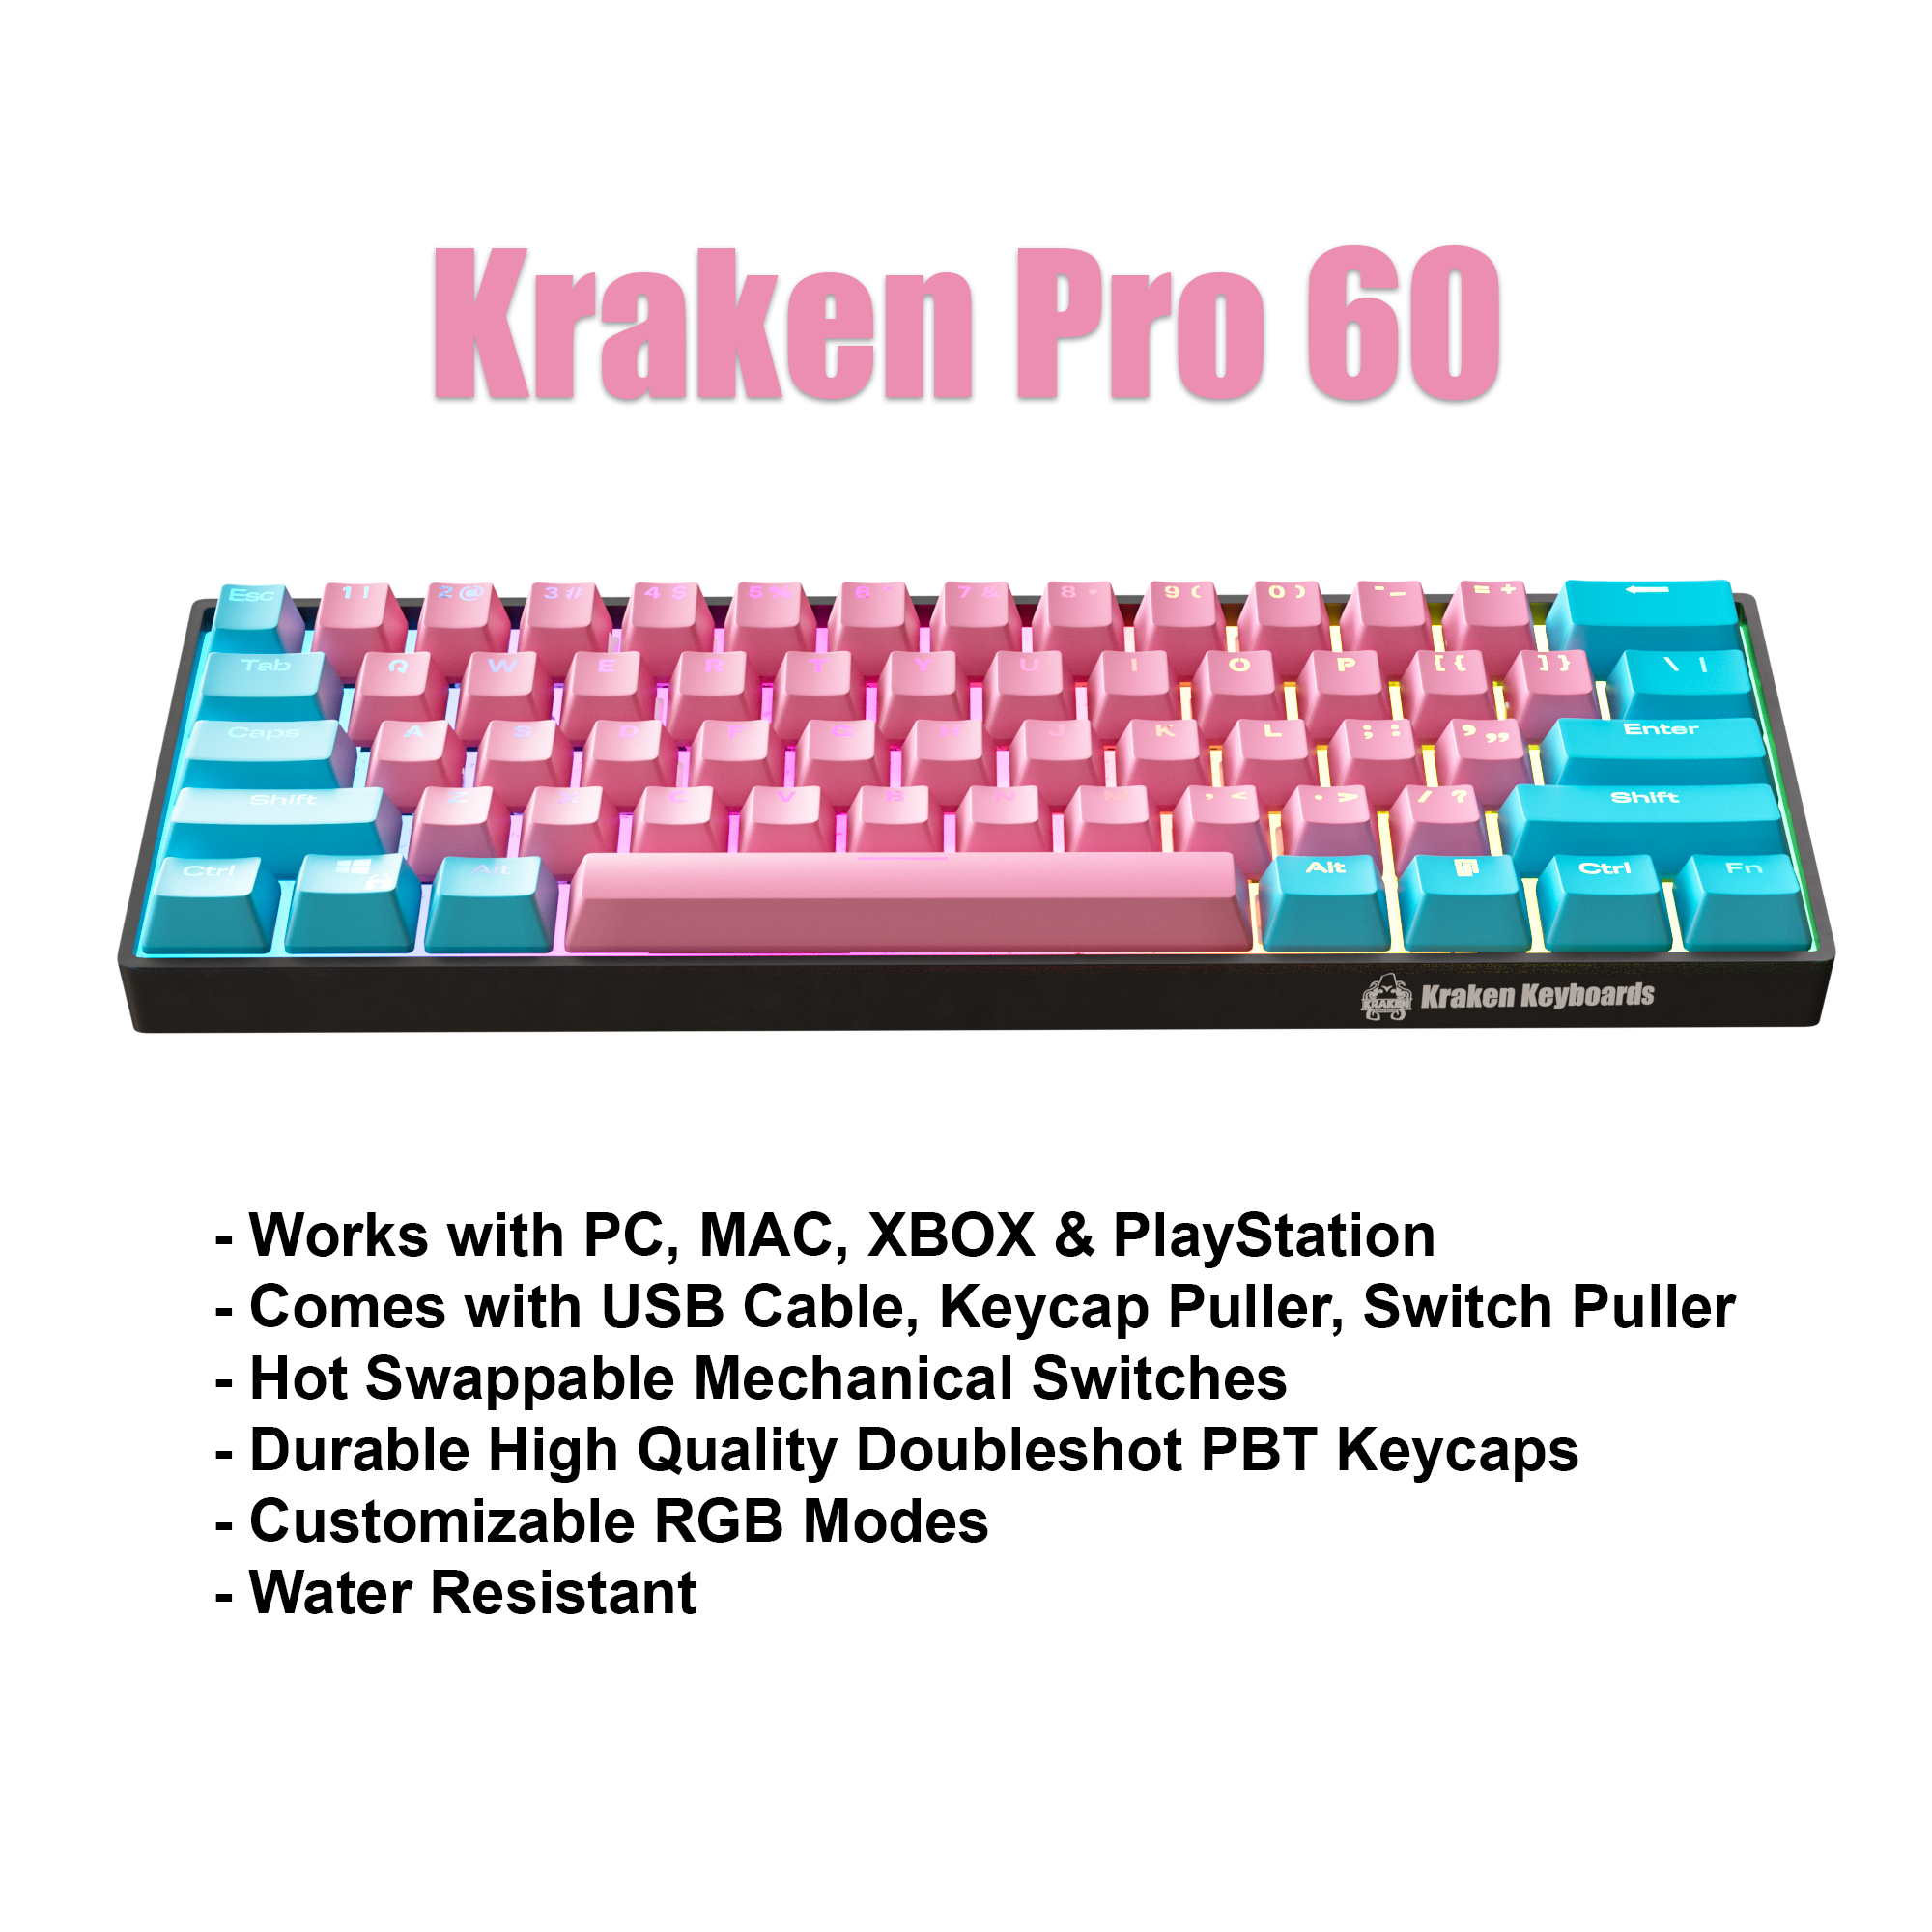 COTTON CANDY Keyboard + COILED CABLE + MOUSE PAD Bundle